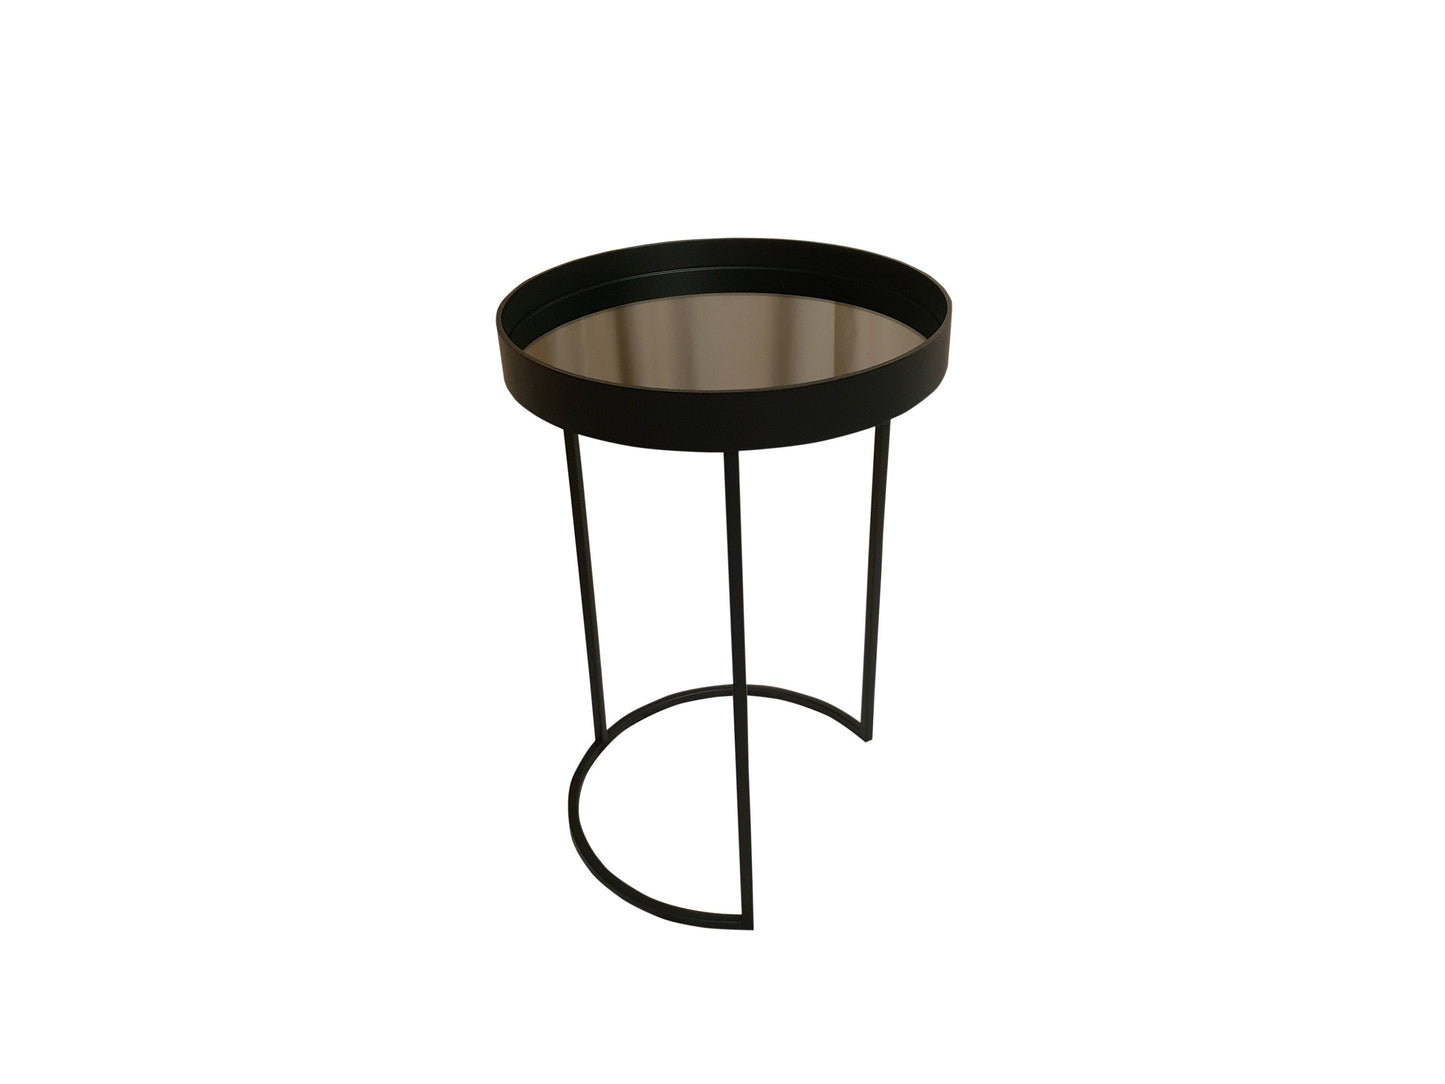 Powder Coated Orion Occasional Tray Table with Grey Mirror Insert